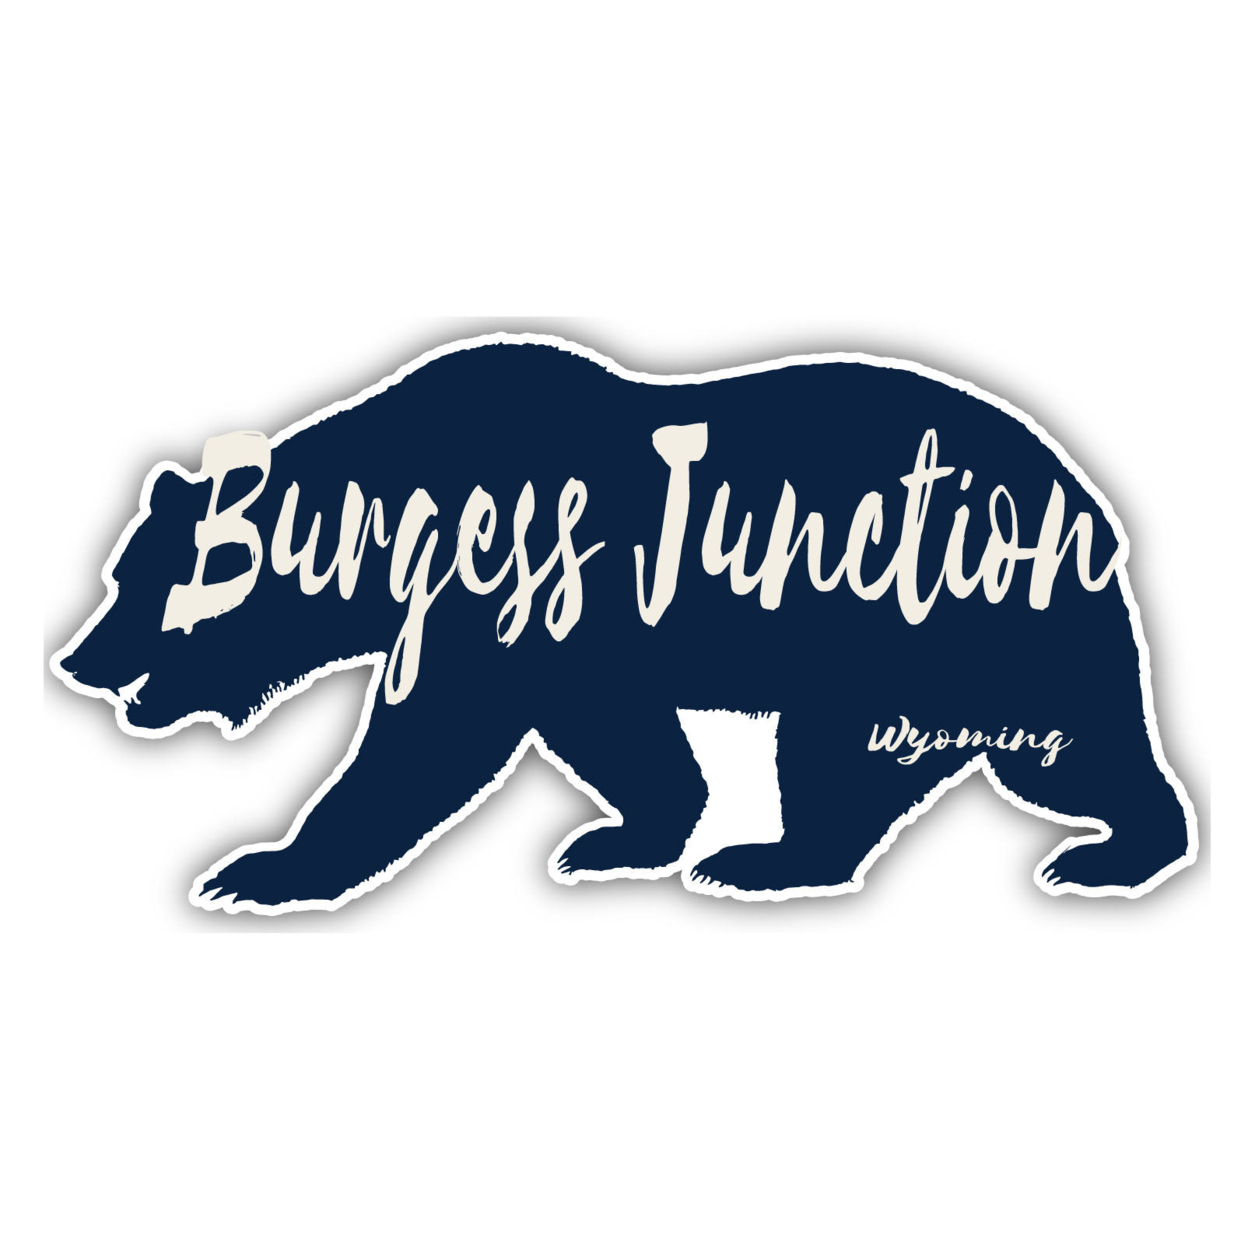 Burgess Junction Wyoming Souvenir Decorative Stickers (Choose Theme And Size) - Single Unit, 10-Inch, Bear